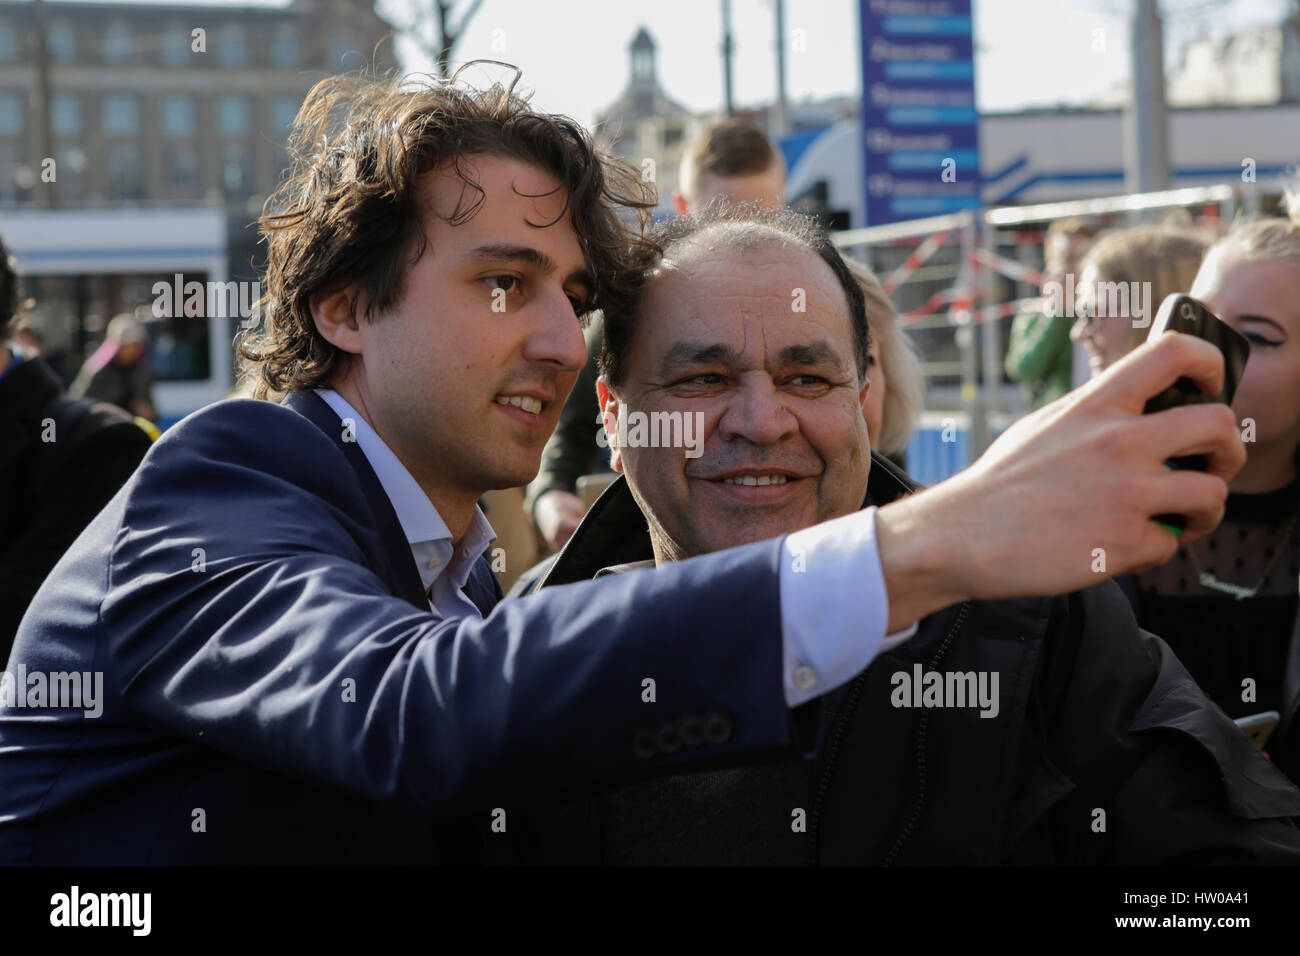 Amsterdam, Netherlands. 15th Mar, 2017. Jesse Klaver gets a selfie taken with a voter. Jesse Klaver, the party leader of the GroenLinks, canvassed together with a number of GroenLinks volunteers outside of Amsterdam Central Station, to pursue undecided voters, to vote for his party in the Dutch general election. Photo: Cronos/Michael Debets Credit: Cronos Foto/Alamy Live News Stock Photo